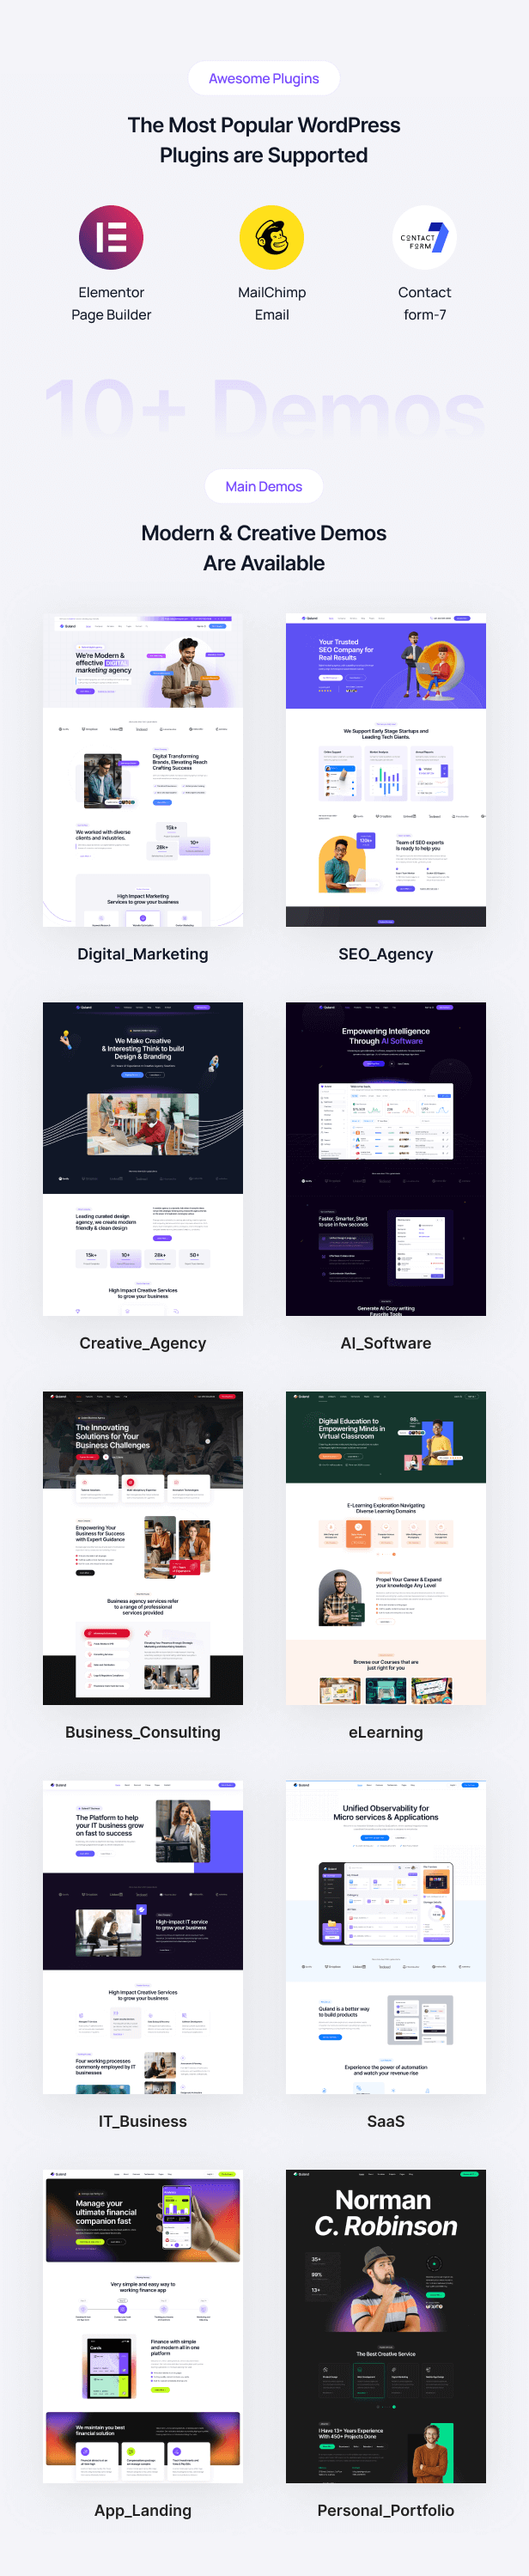 Quland - Multi Purpose Landing Page for Corporate and Business Elementor WordPress Theme